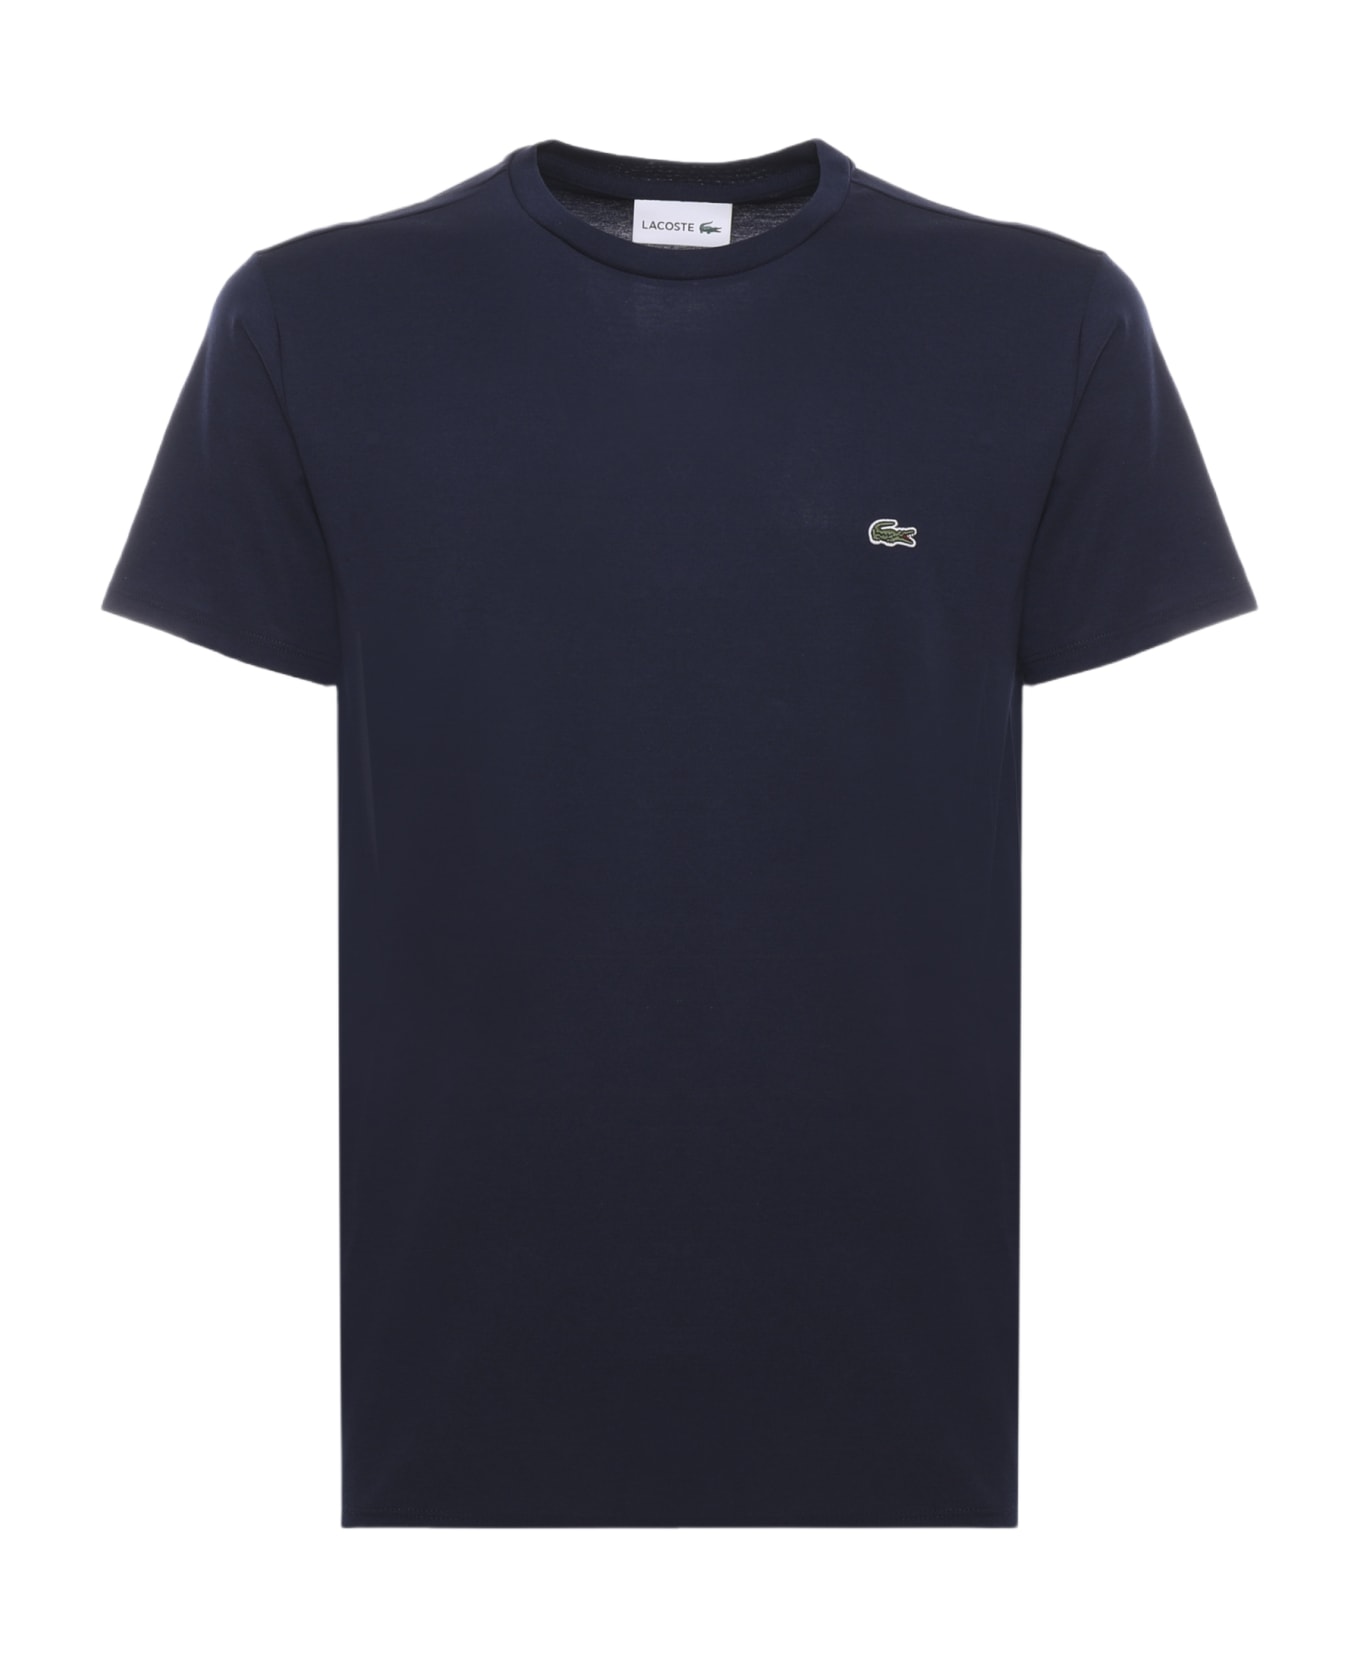 Lacoste Navy Blue Cotton Jersey T-shirt シャツ